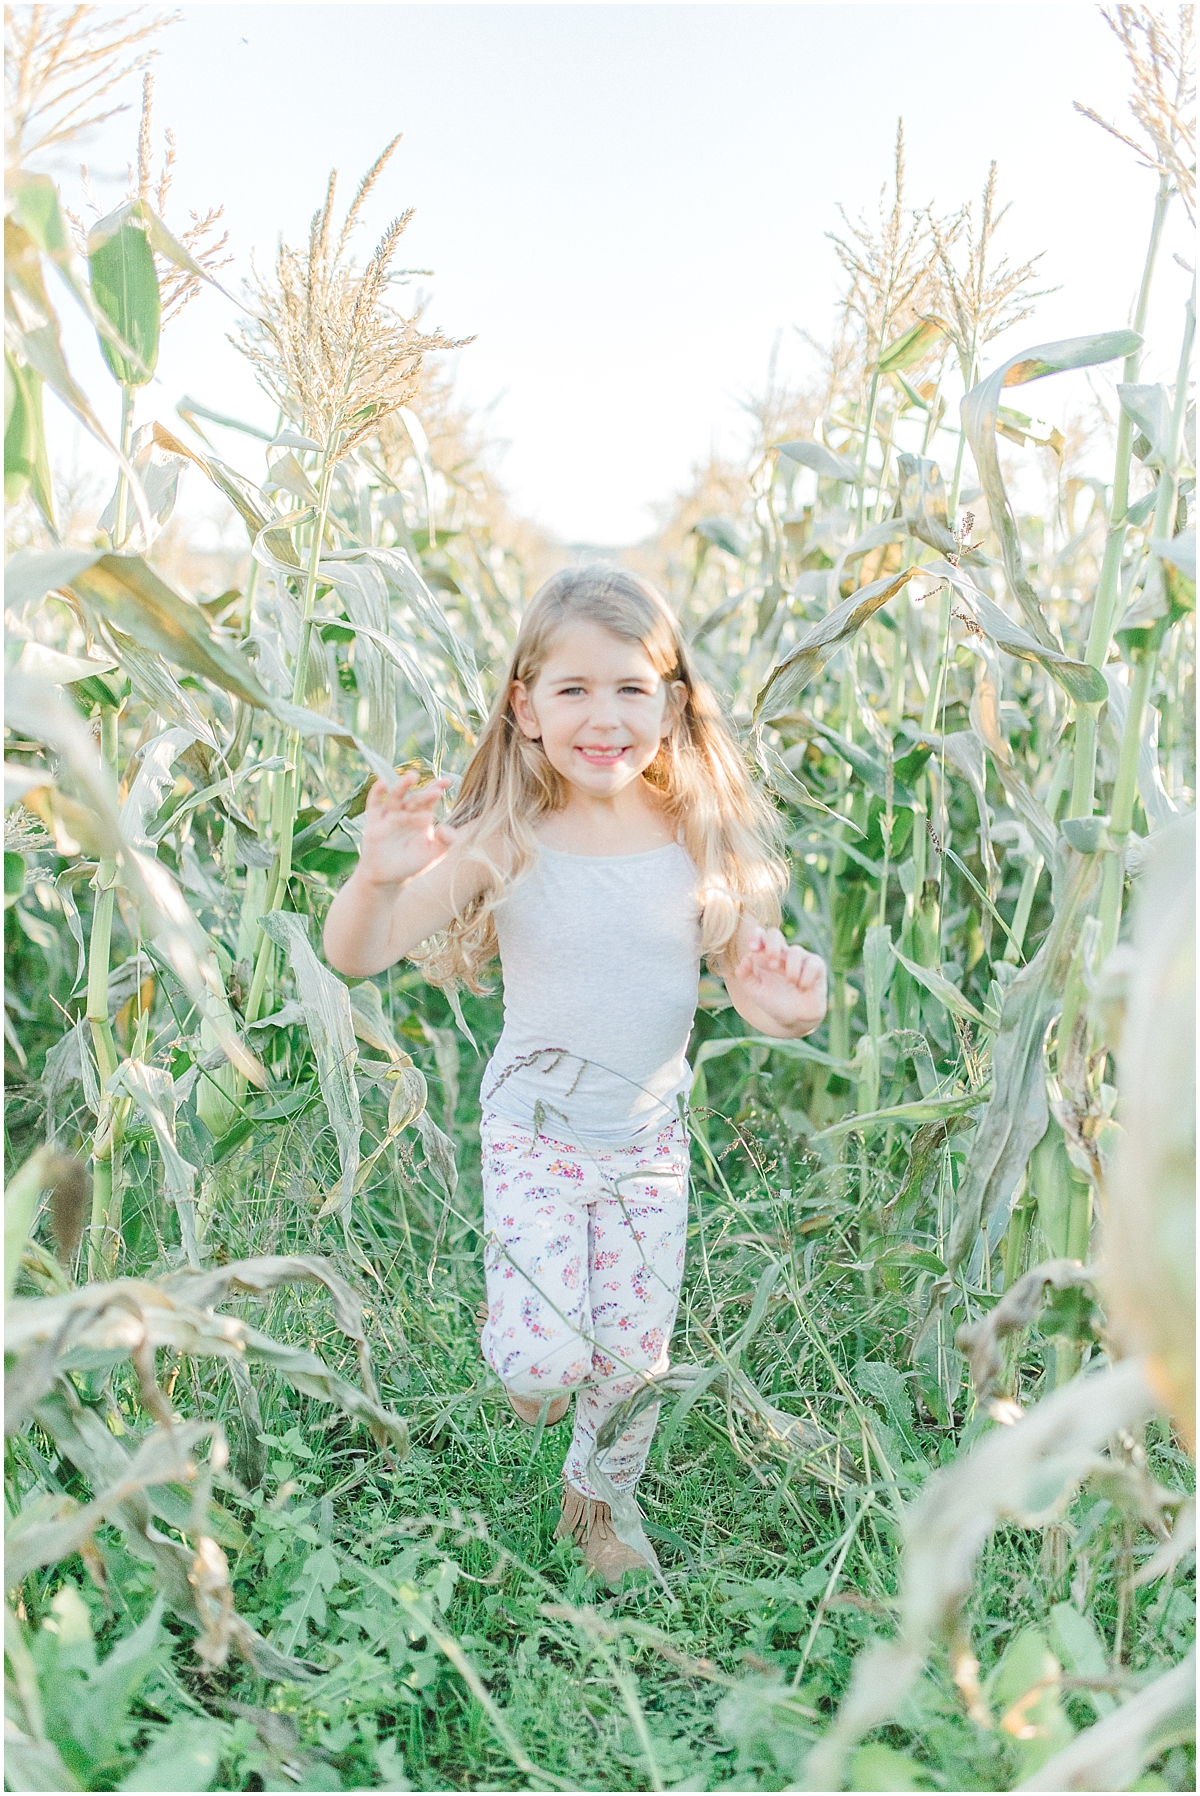 Pumpkin Patch Photo Shoot With Toddler and Mommy | Emma Rose Company Seattle Portland Light and Airy Wedding Photographer | Kindred Presets | Film_0013.jpg